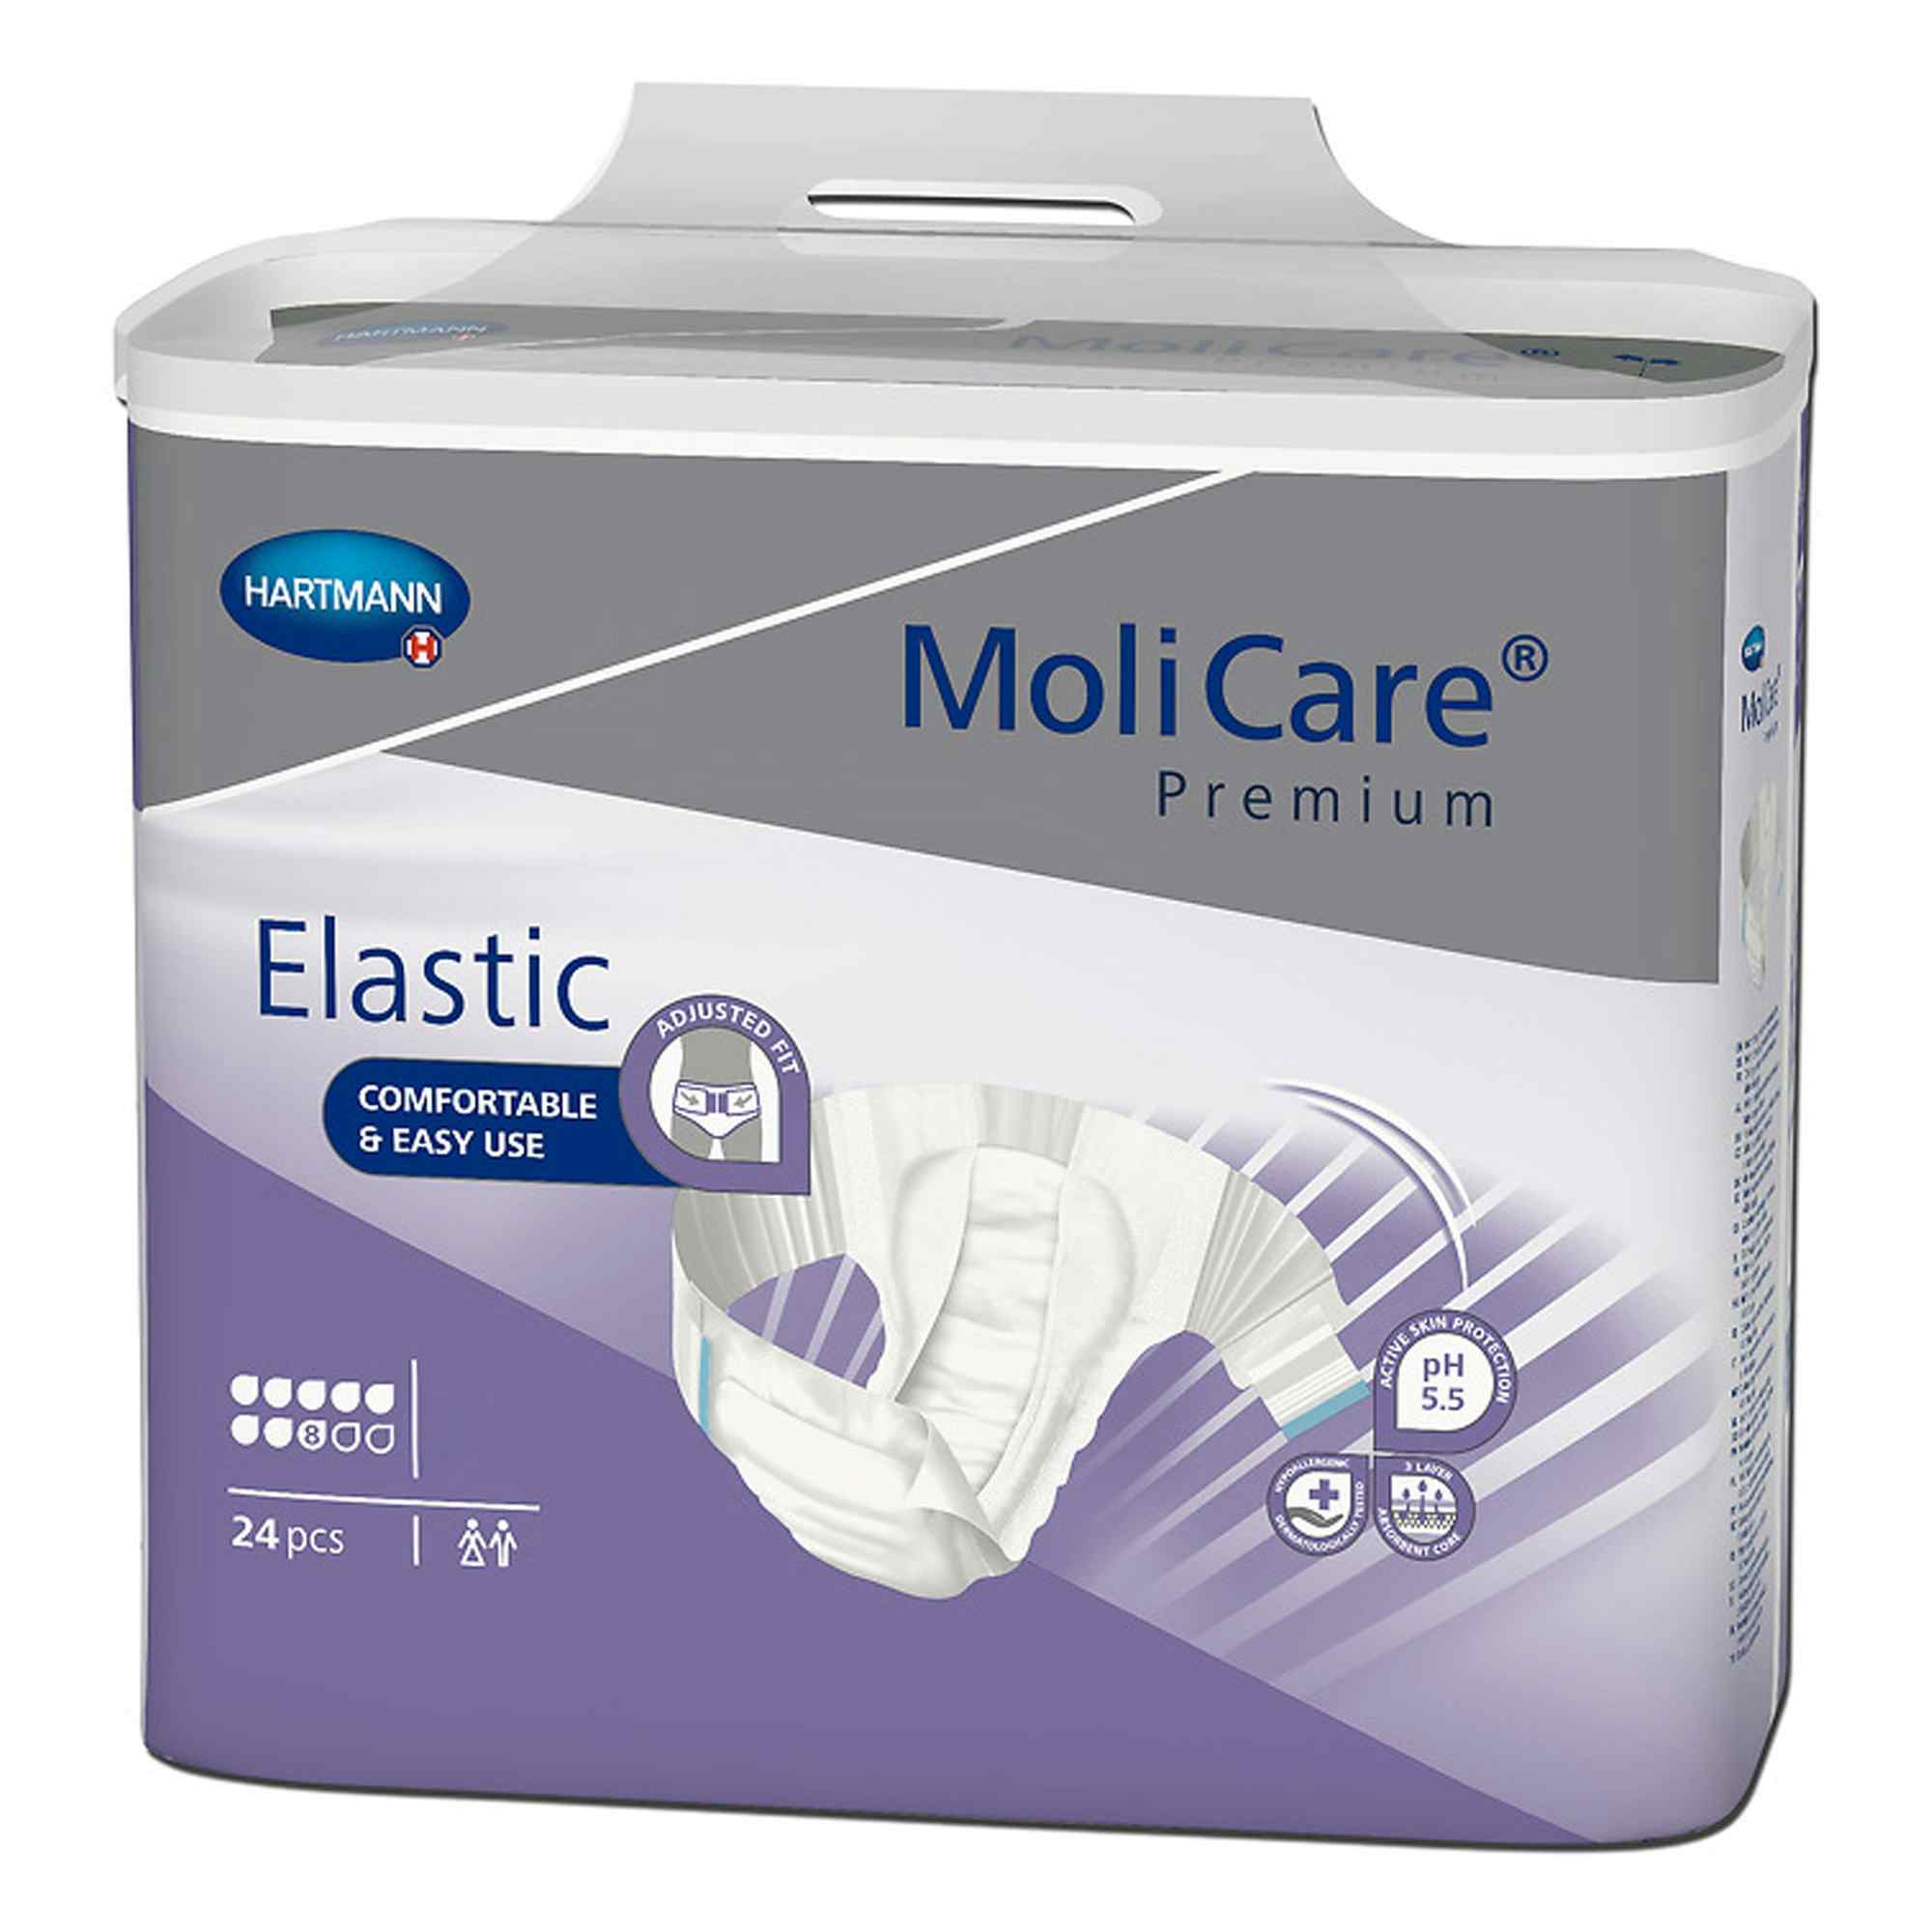 MoliCare Premium 8D Elastic Disposable Brief Adult Diapers with Tabs, Heavy Absorbency, 165474, X-Large (55-69") - Case of 56